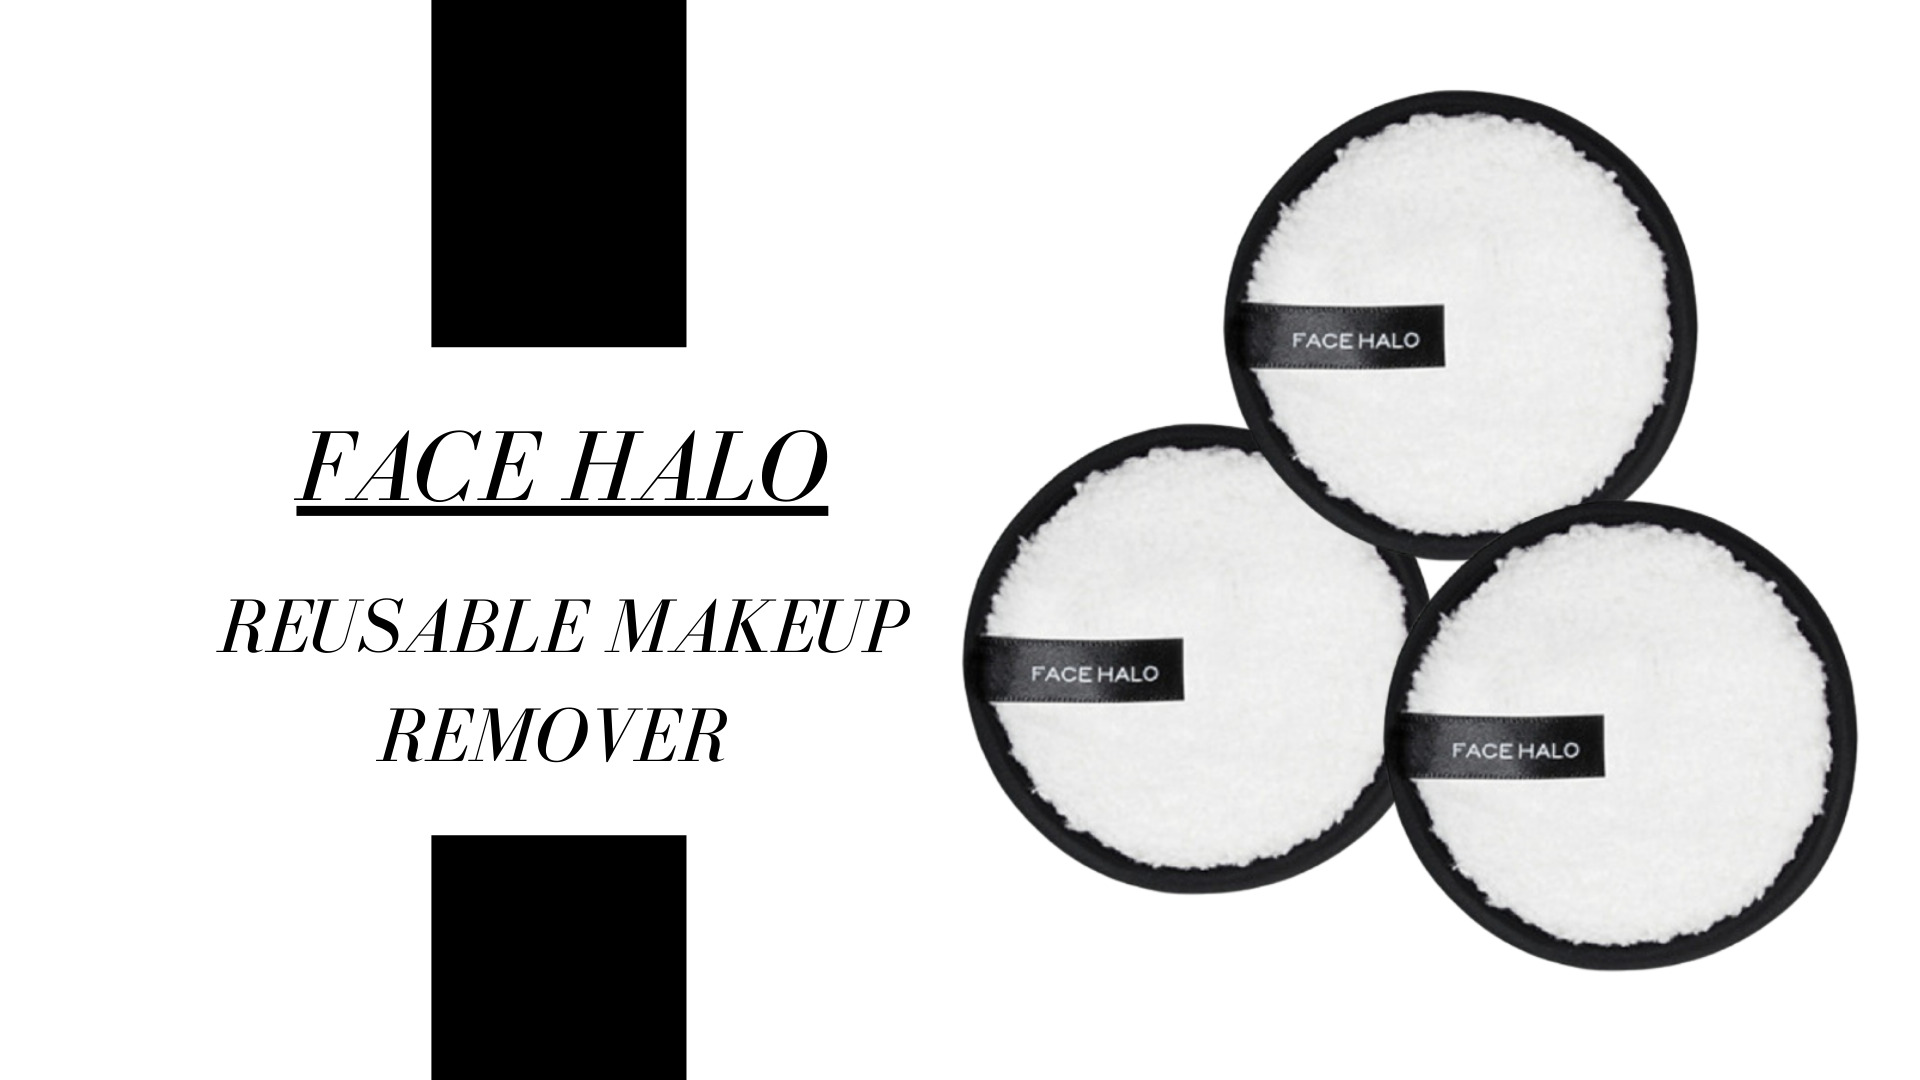 The first cleanser that we would like to present to you is not a conventional cleanser. It is a sustainable beauty tool that is reusable for up to 200 wash cycles, and just by adding water gently removes makeup and impurities!  The Face Halo Original is such a great product. We totally recommend it!